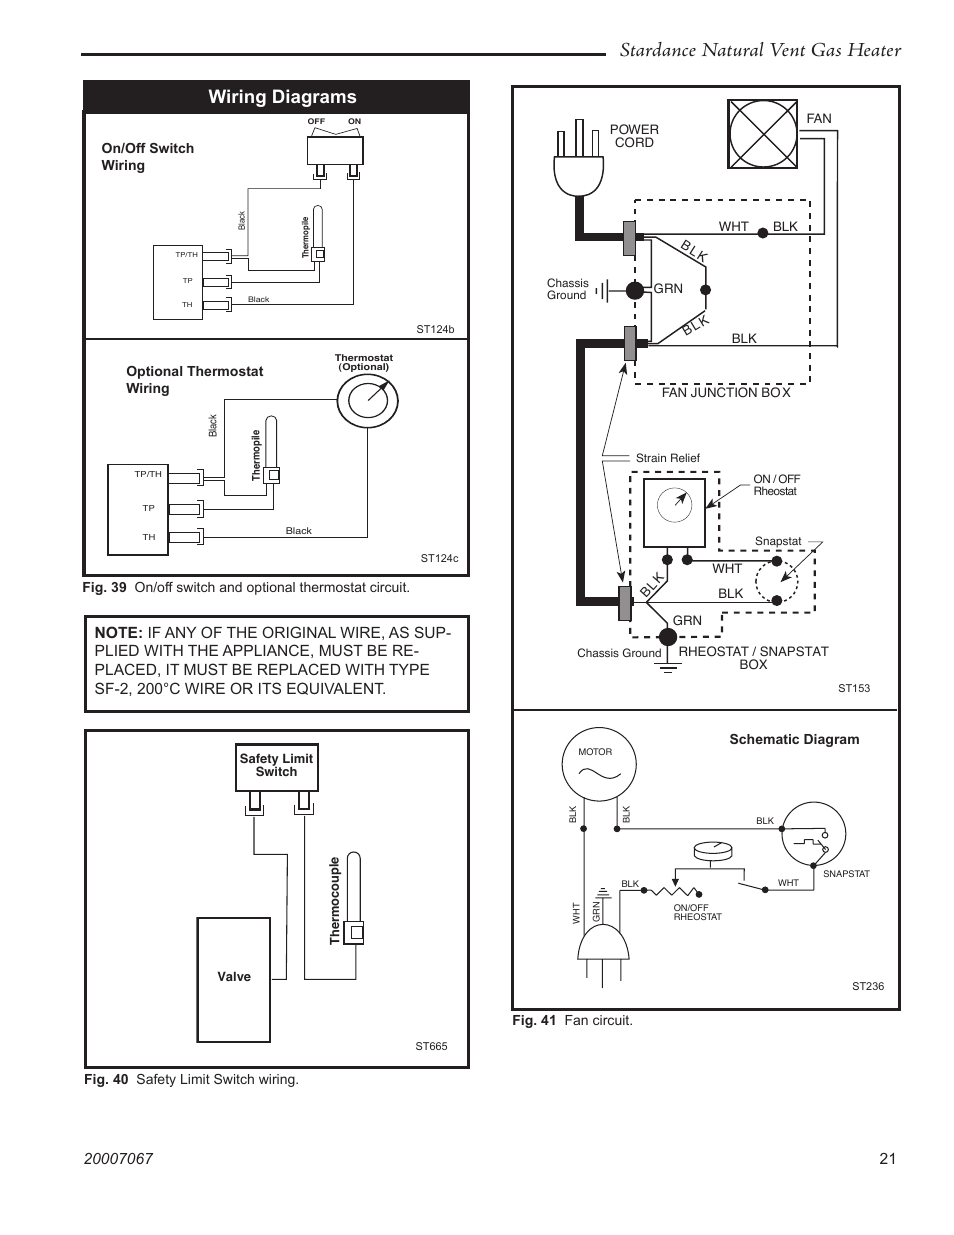 Stardance Natural Vent Gas Heater  Wiring Diagrams